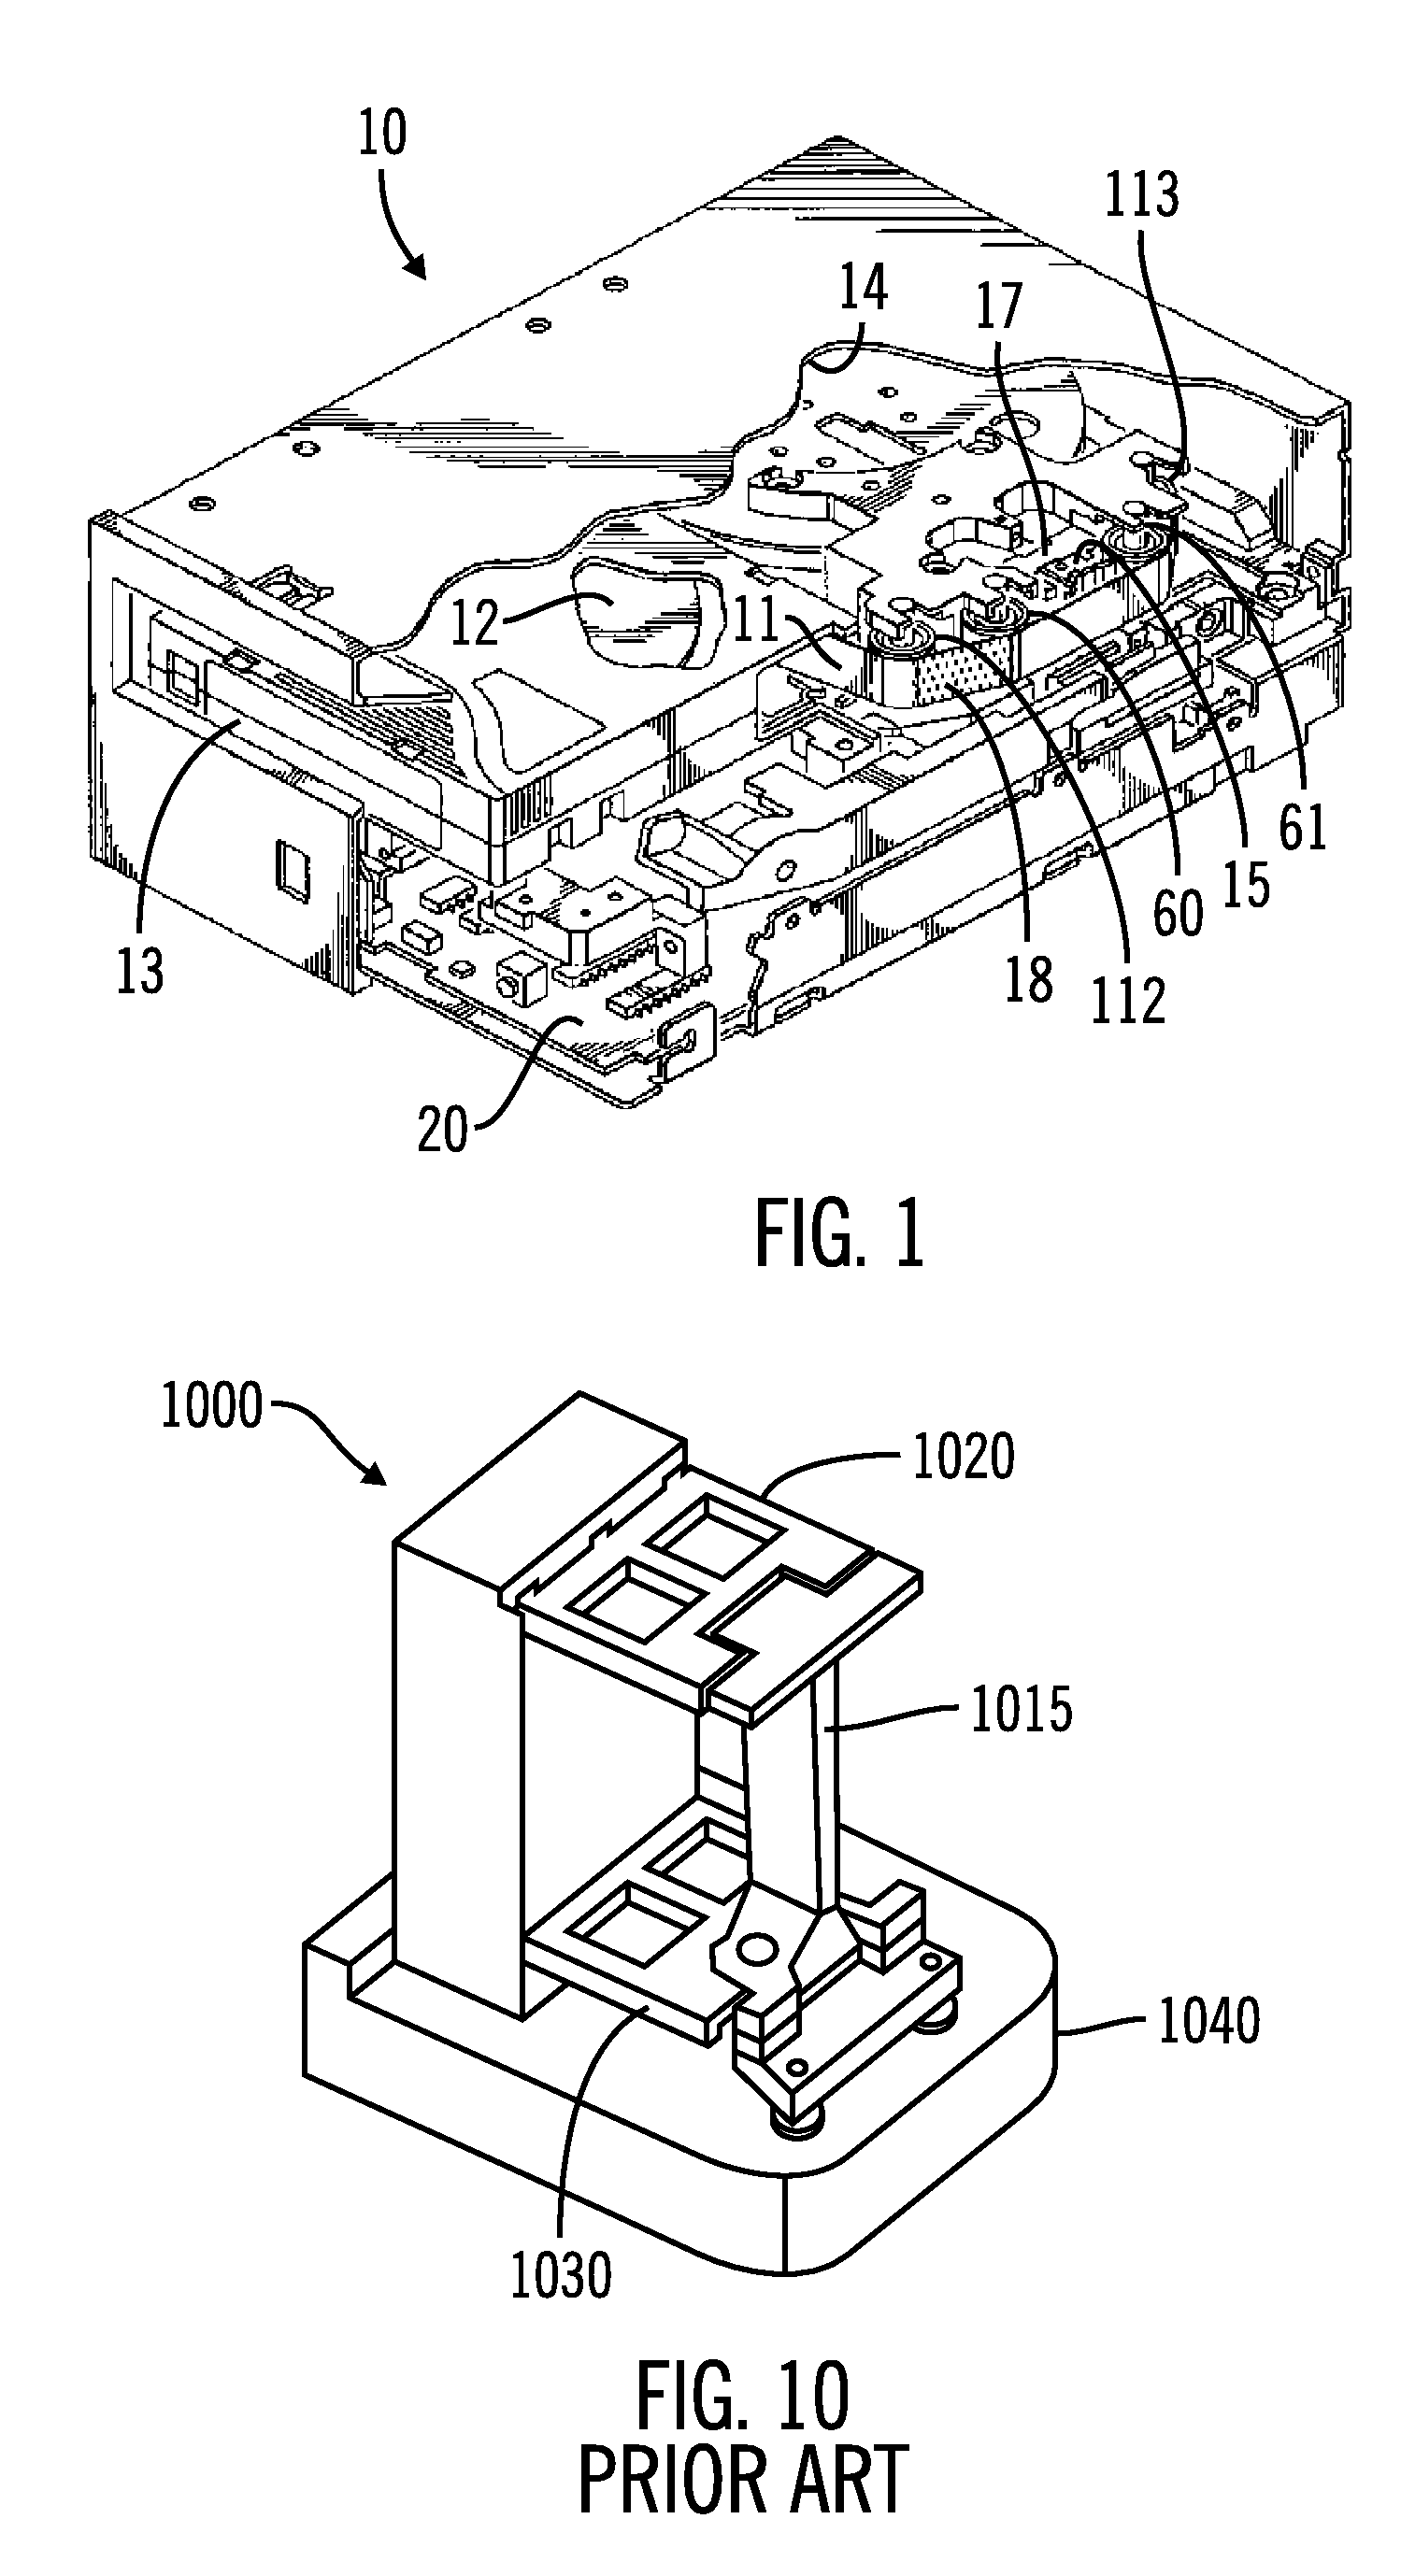 Moving magnet actuation of tape head